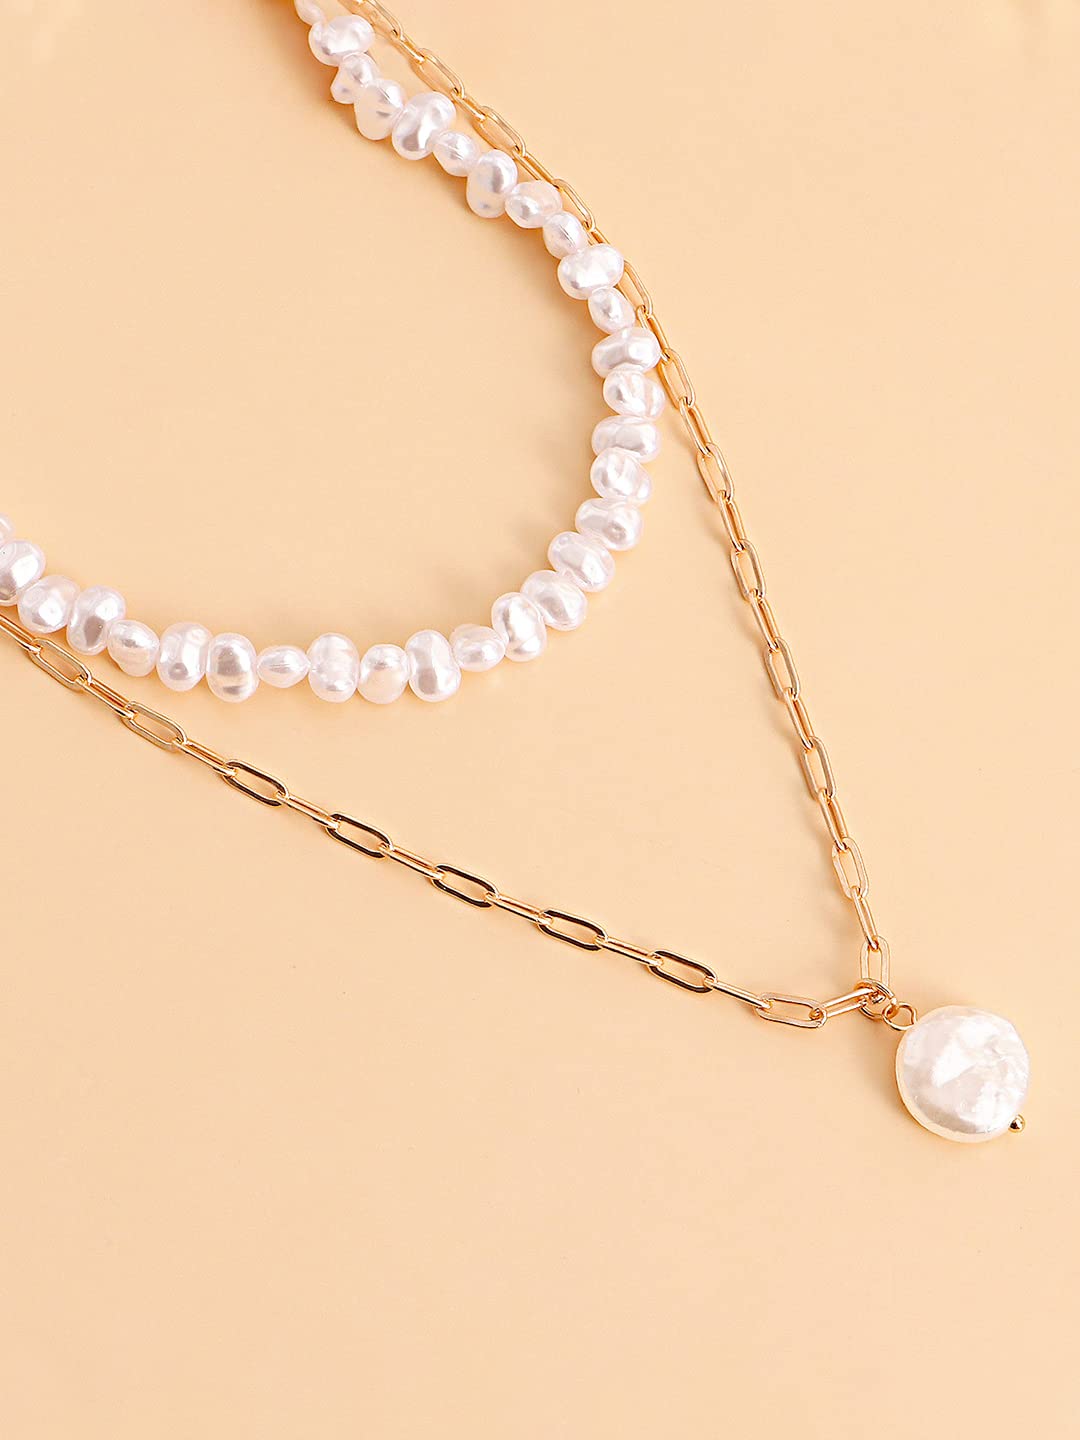 Yellow Chimes Necklace For Women Layered Gold Tone Pearl Studded Charm Pendant Chain For Women and Girls